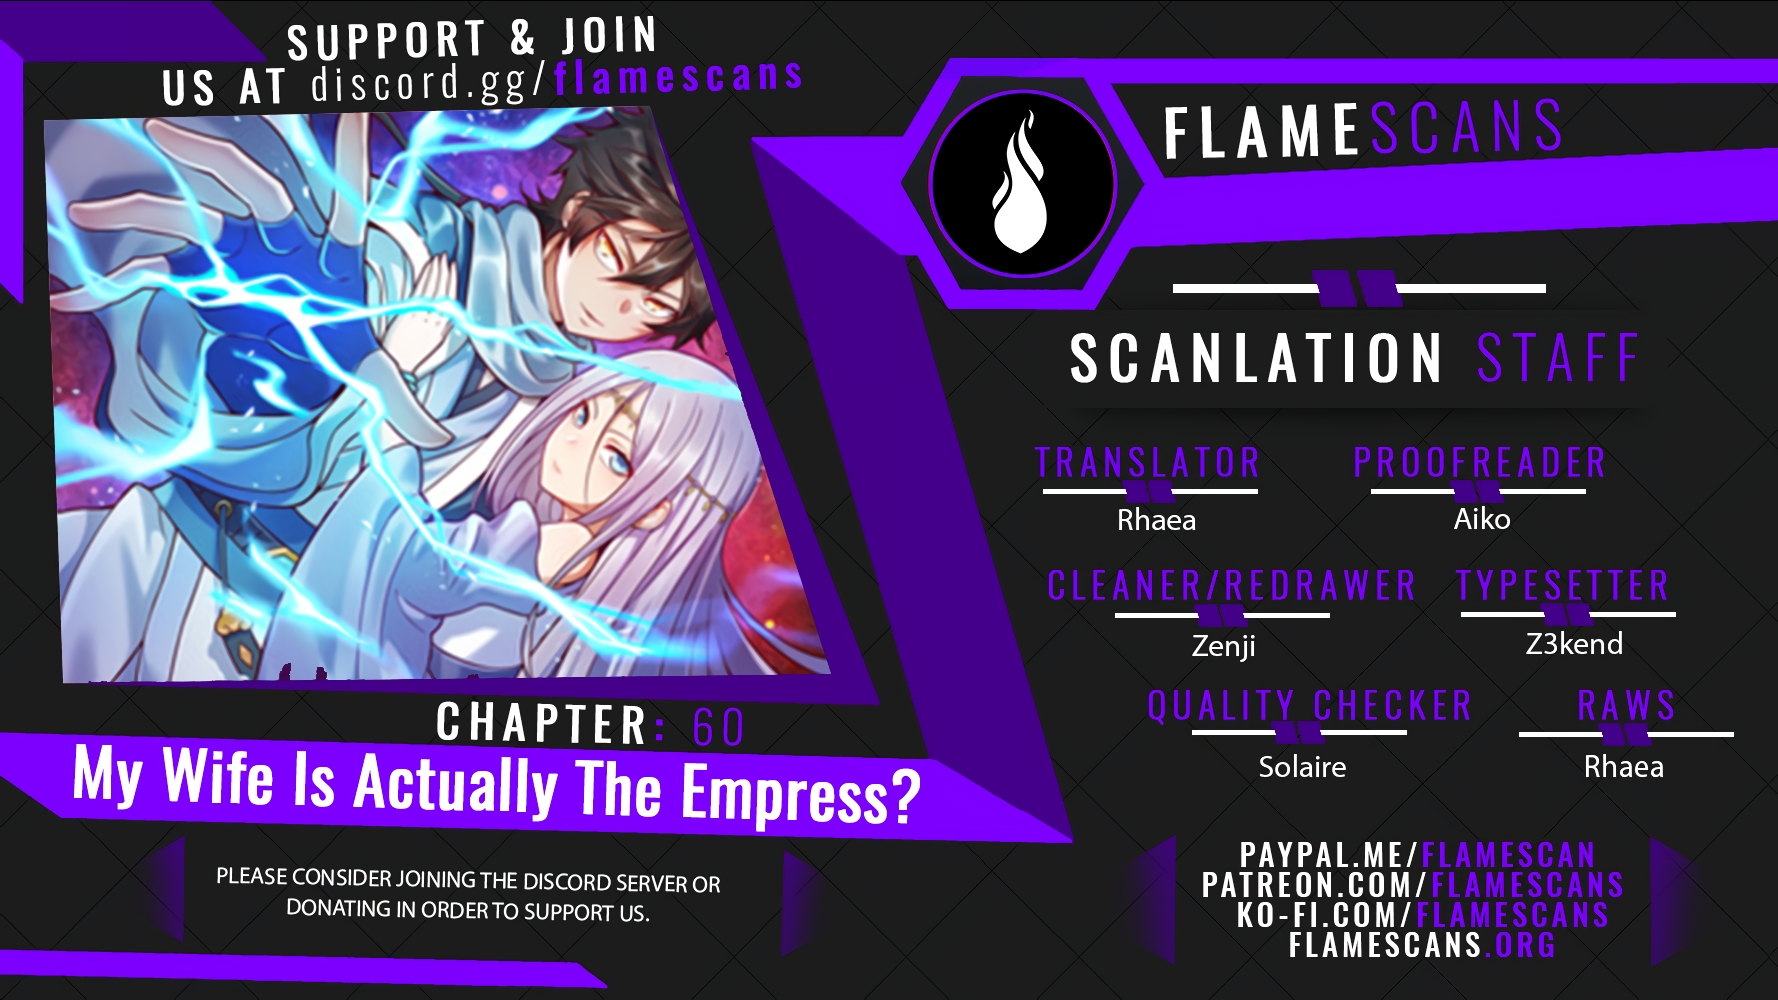 My Wife Is Actually The Empress? - Chapter 14170 - Image 1